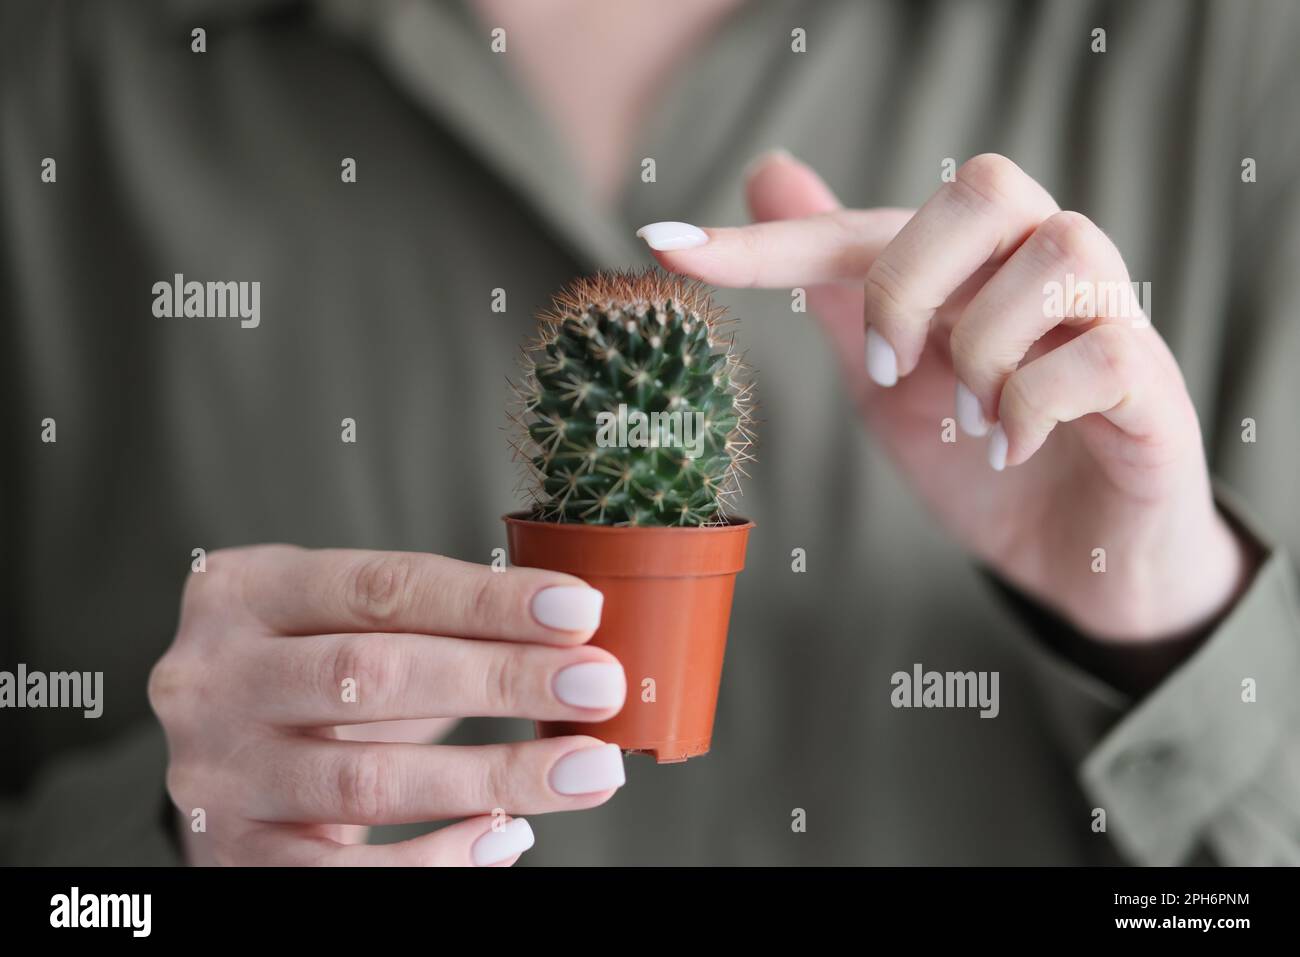 Woman touches green spiked cactus with index finger Stock Photo